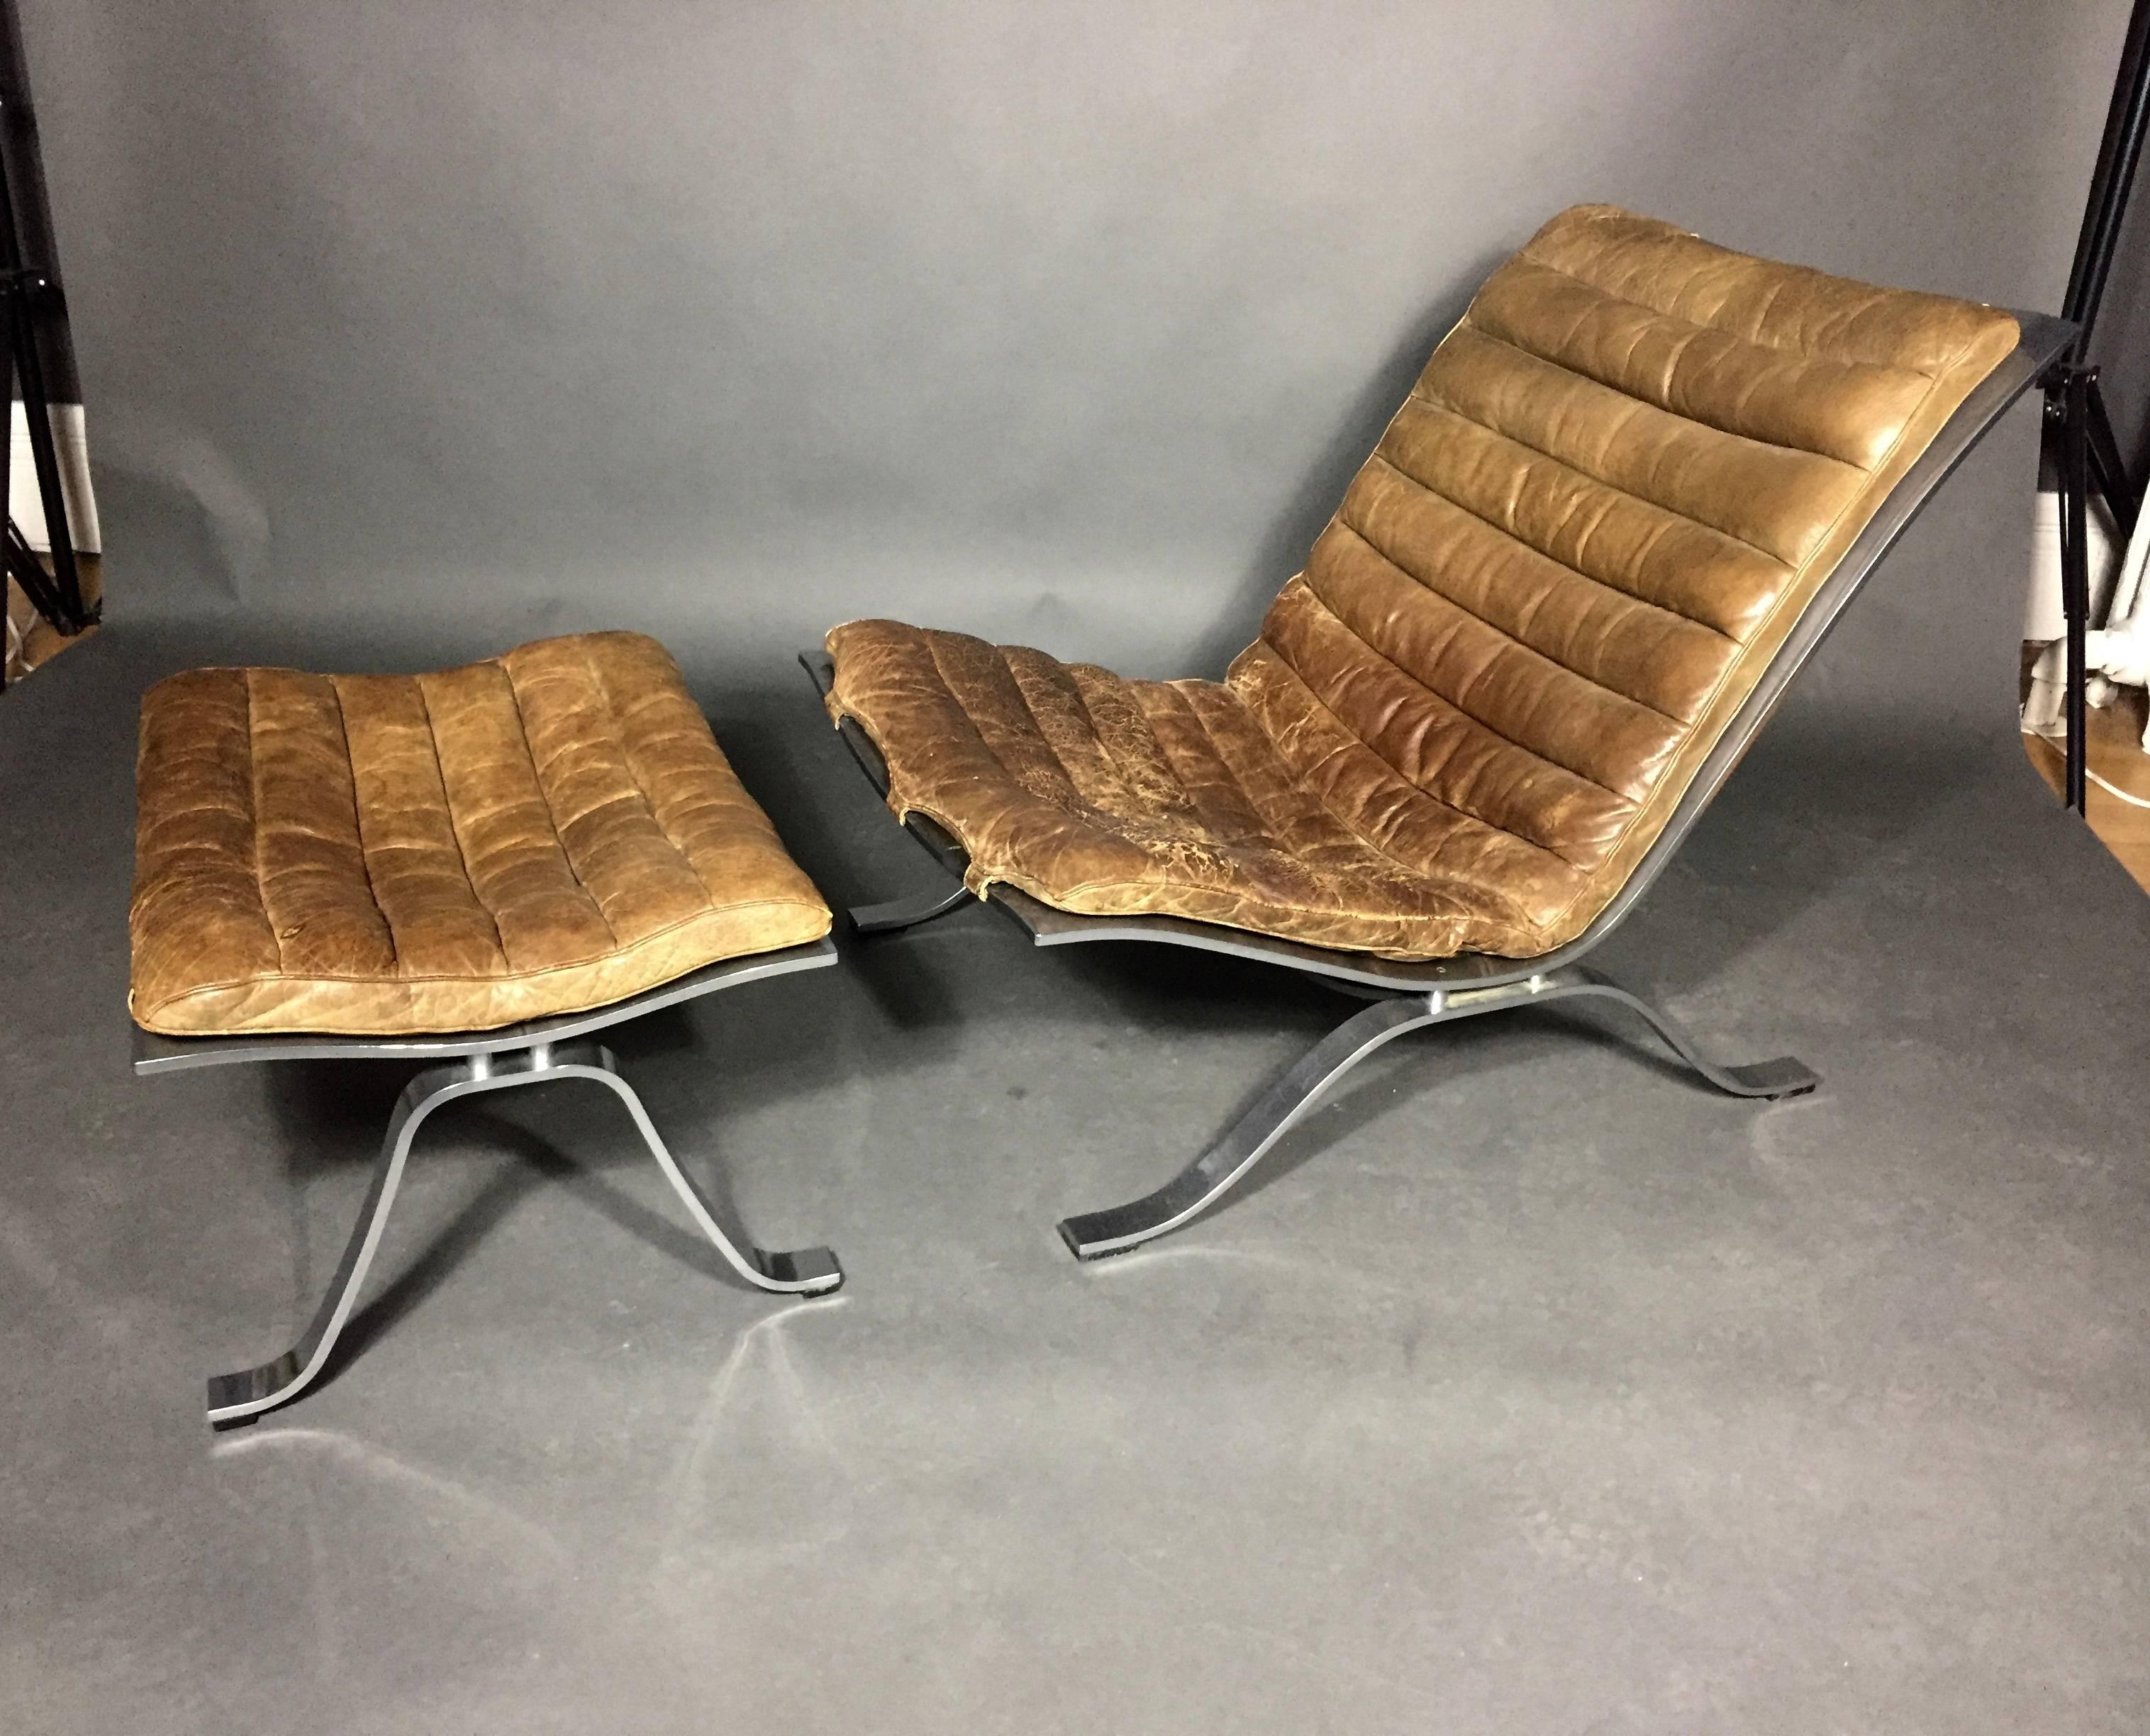 A very sexy original Ari chair and ottoman by Arne Norell in cognac leather and chromed steel. Wonderful vintage condition with normal wear to leather seating. Just spectacular. Möbel AB Arne Norell, Sweden, late 1960s. Original tags to both chair